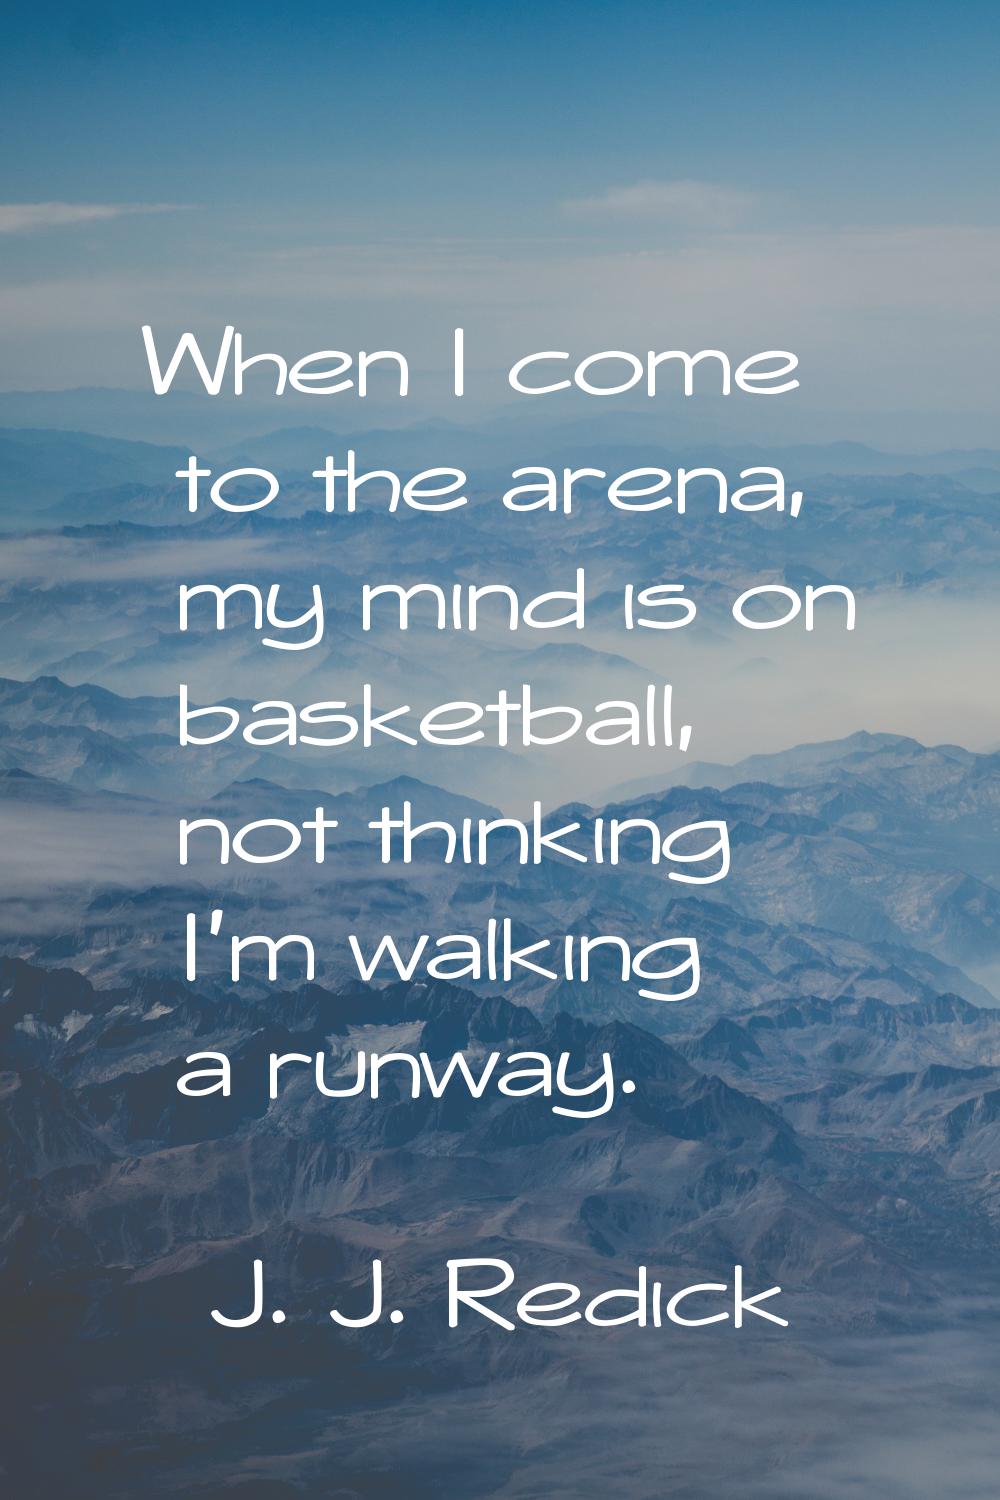 When I come to the arena, my mind is on basketball, not thinking I'm walking a runway.